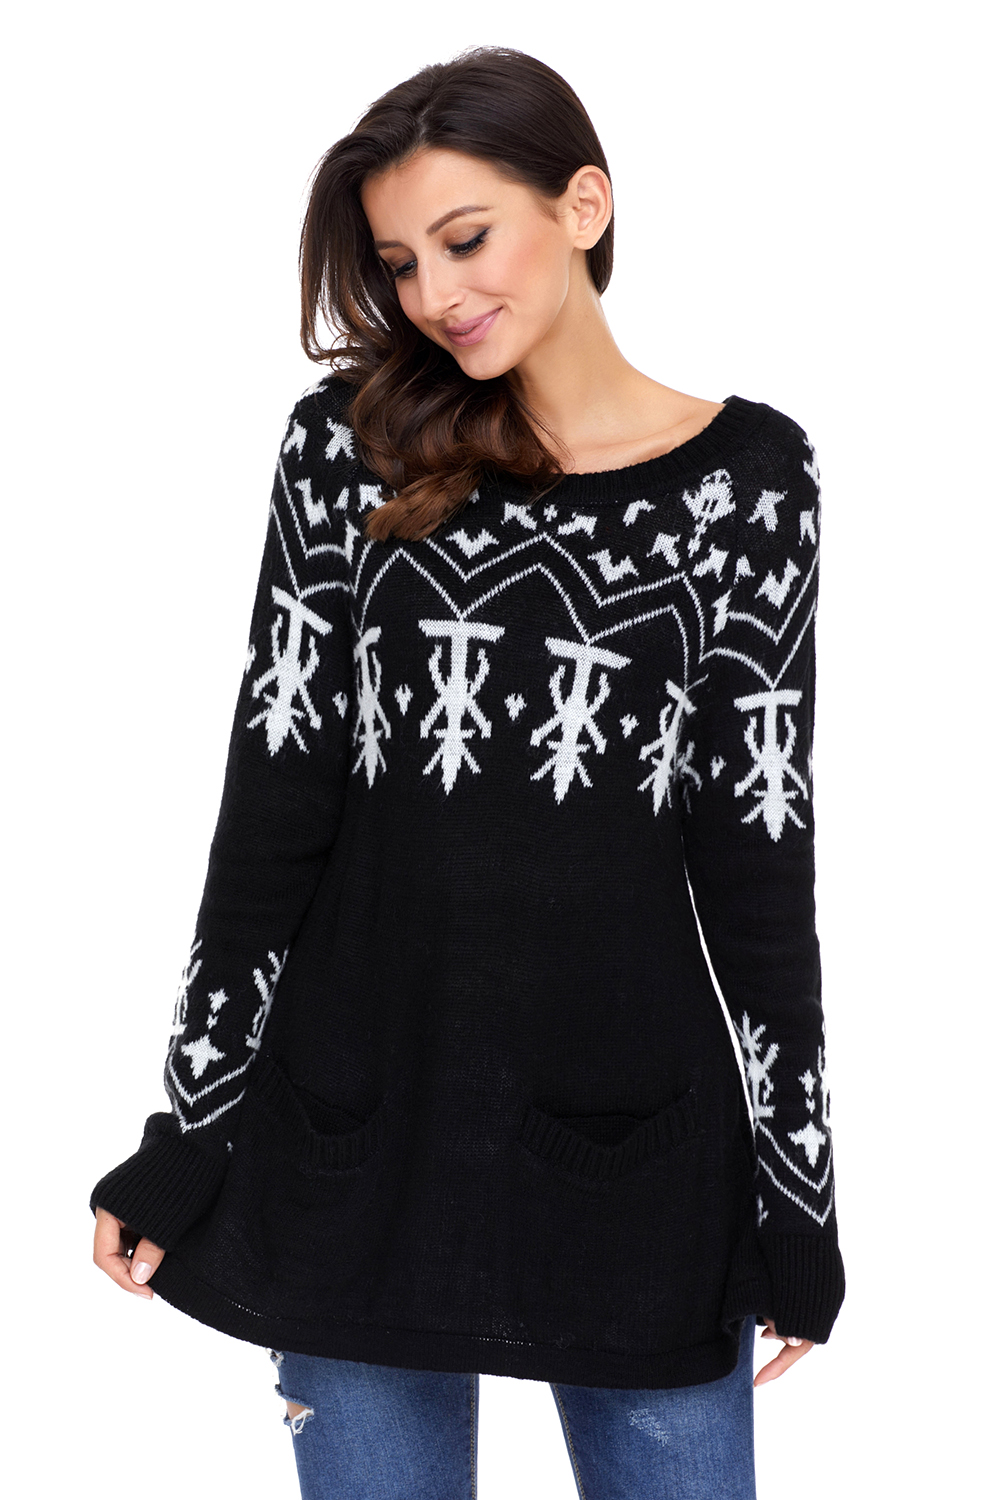 BY27720-2 Black A-line Casual Fit Christmas Fashion Sweater